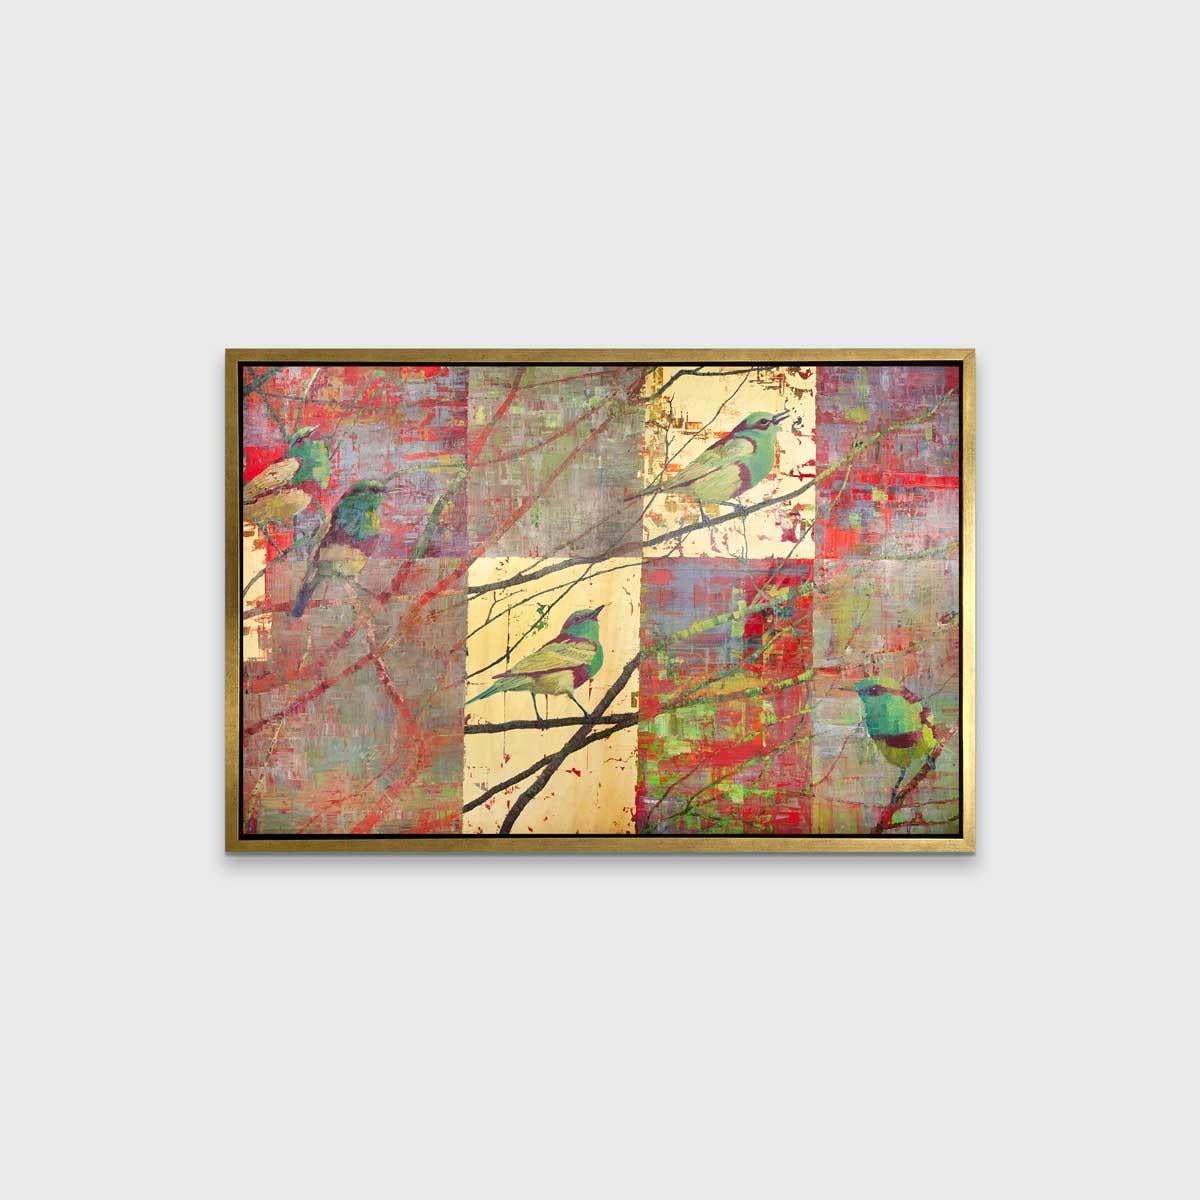 This abstract limited edition print features a red and gold rectangular patterned backdrop, in front of which, green and yellow birds sitting on top of branches. The foreground and background colors complement one another seamlessly. 

This Limited